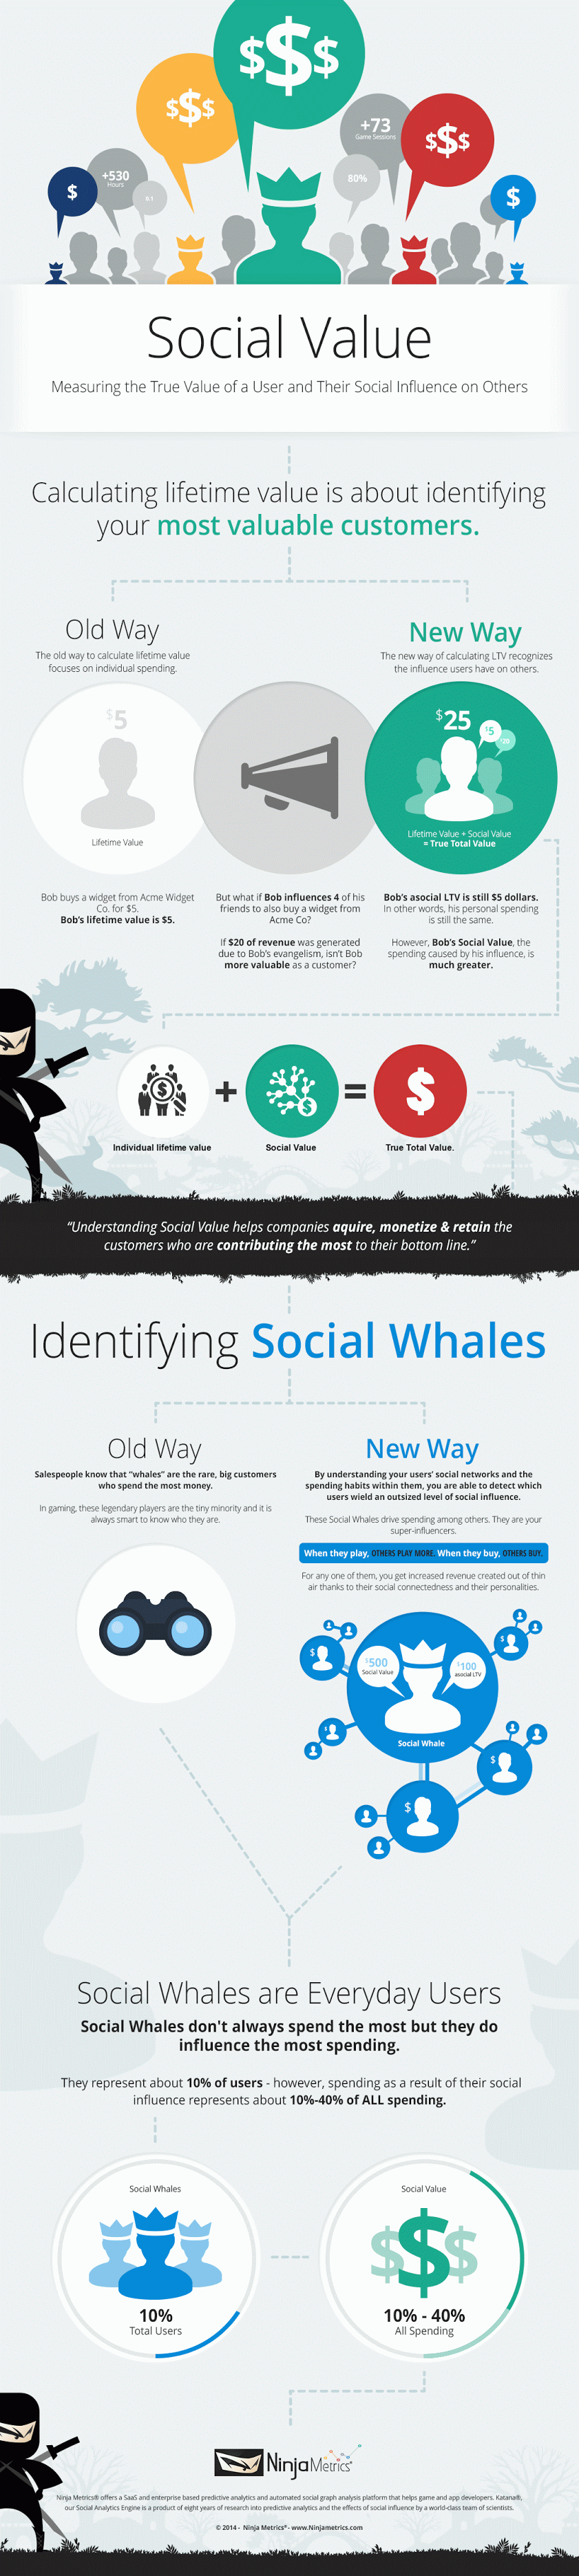 Social Value: Measuring the True Value of a User and Their Social Influence on Others - infographic